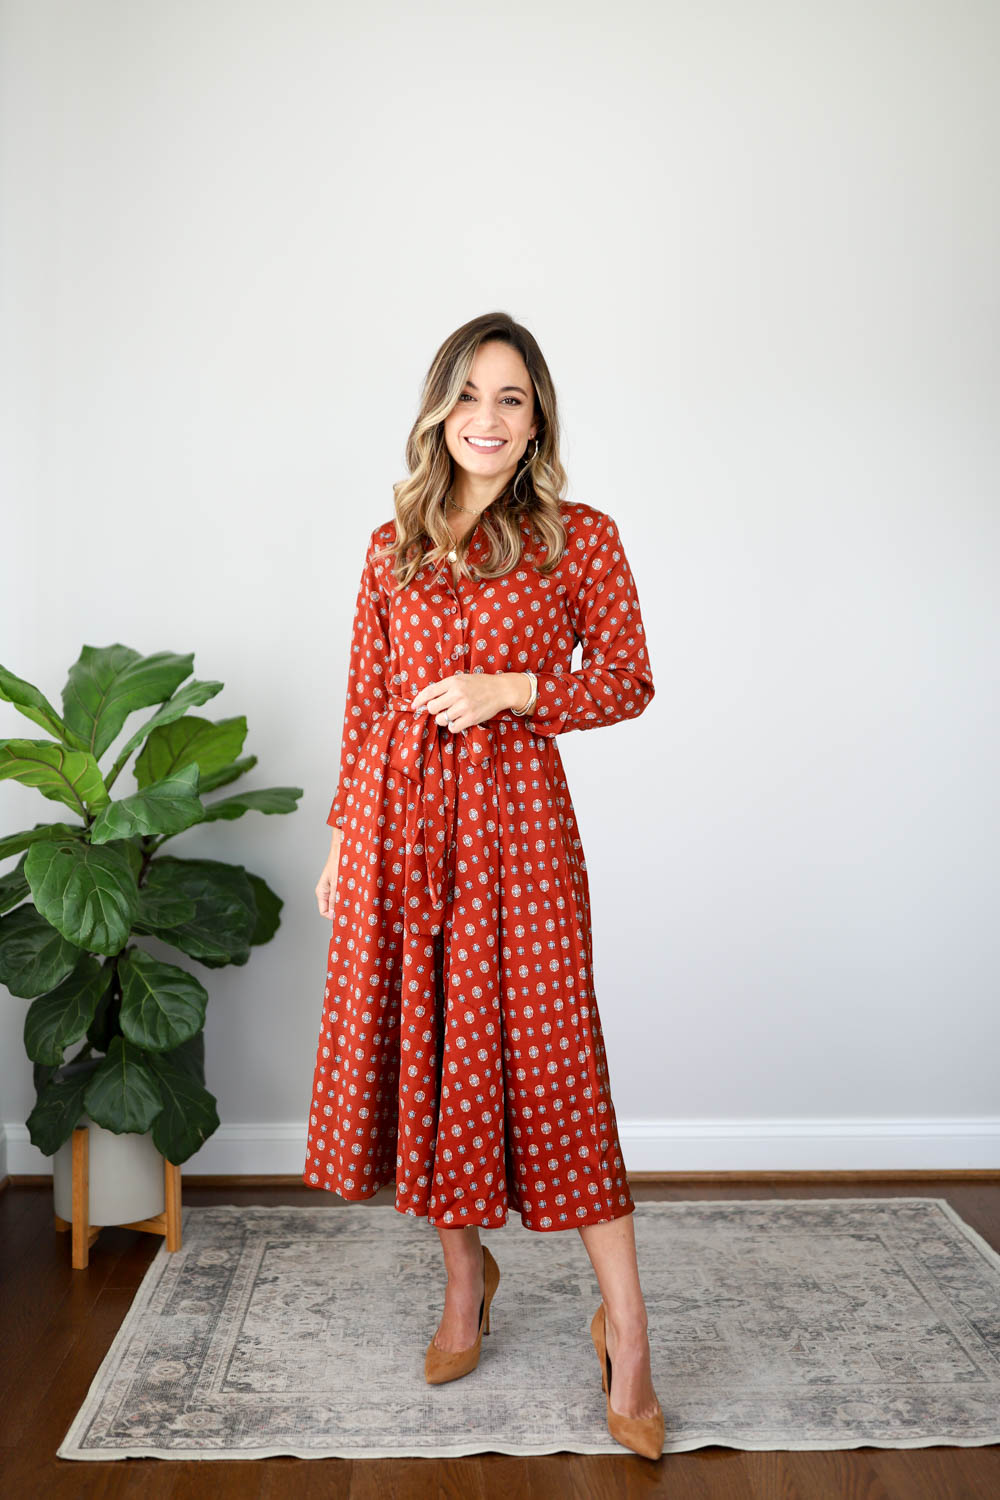 Petite-friendly dresses for work via pumps and push-ups blog | petite style blog | fall dresses | dresses for the office 